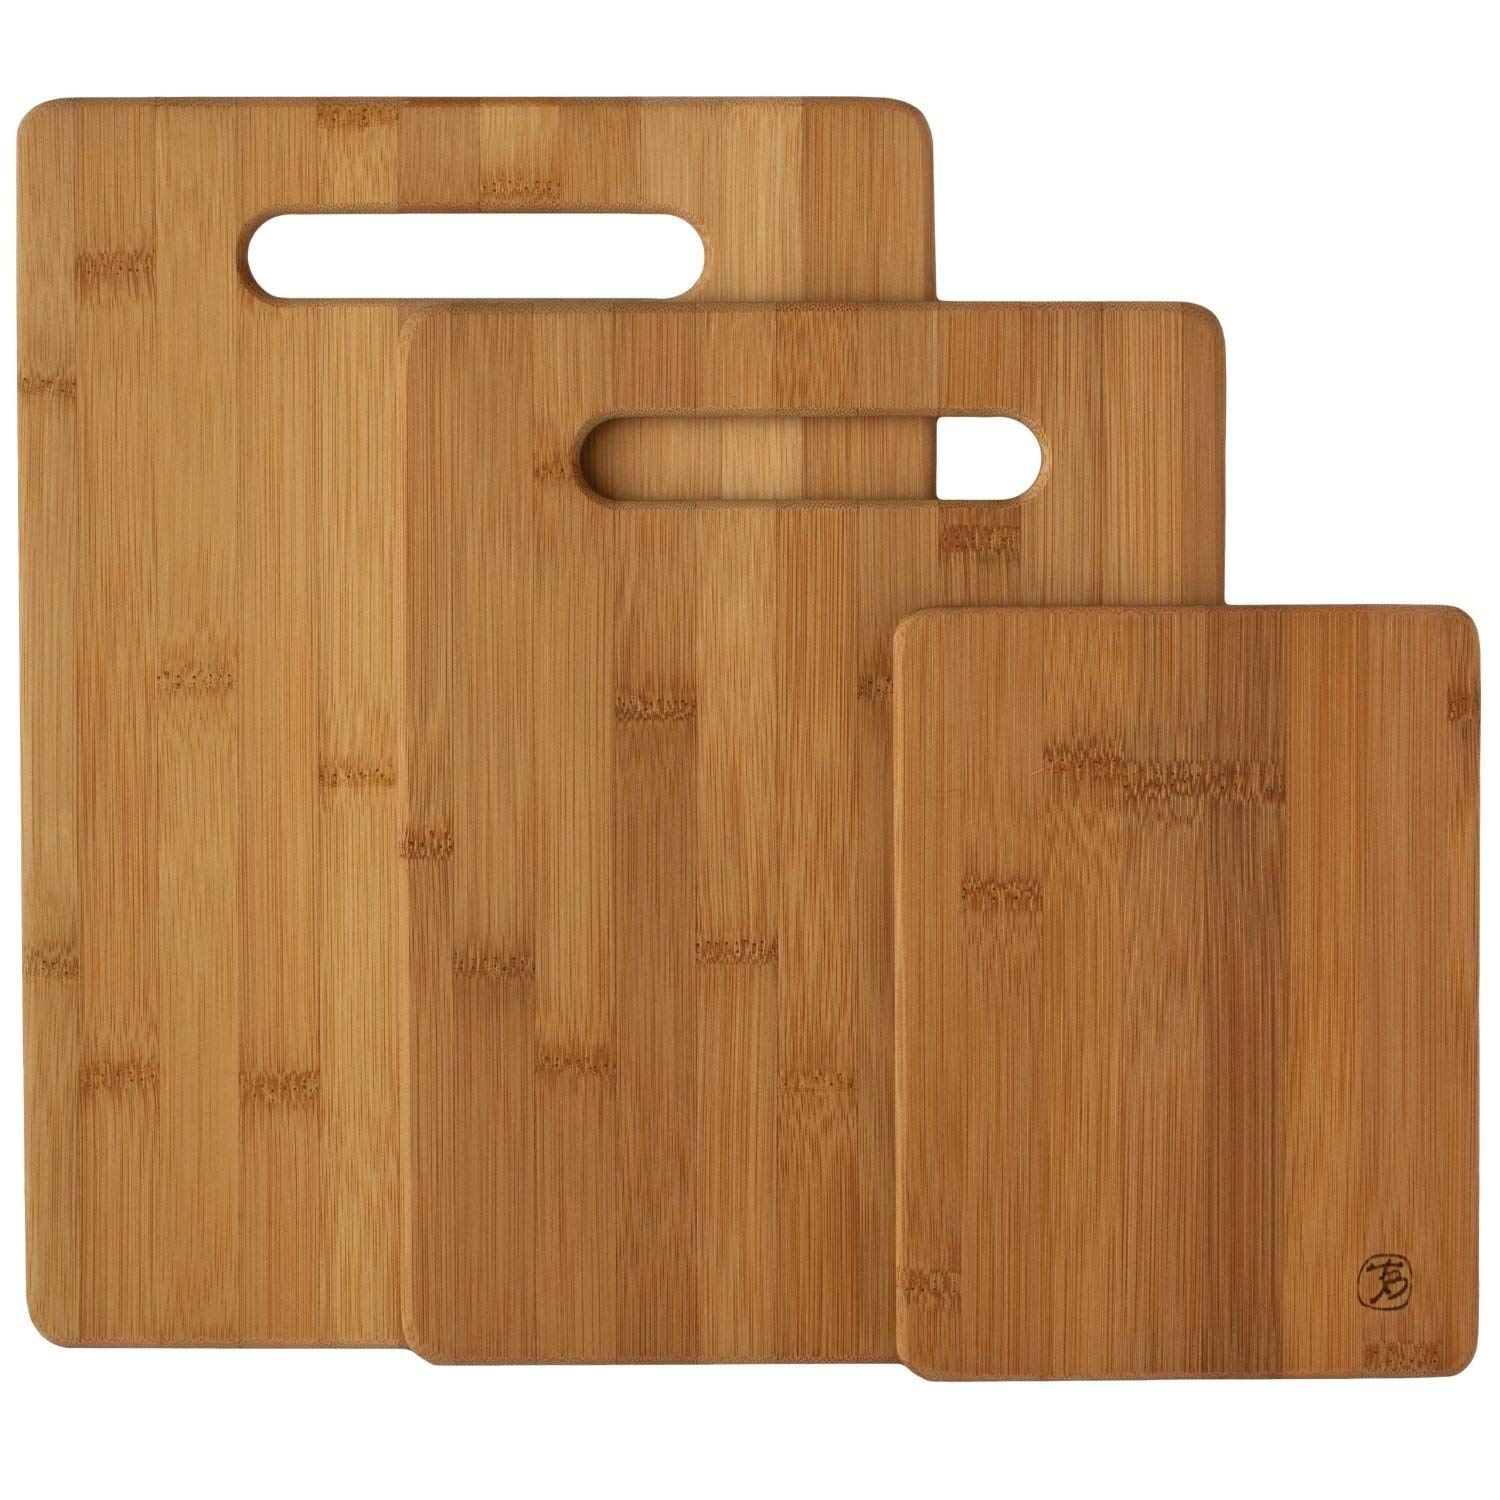 Totally Bamboo 3-Piece Bamboo Serving and Cutting Board Set 